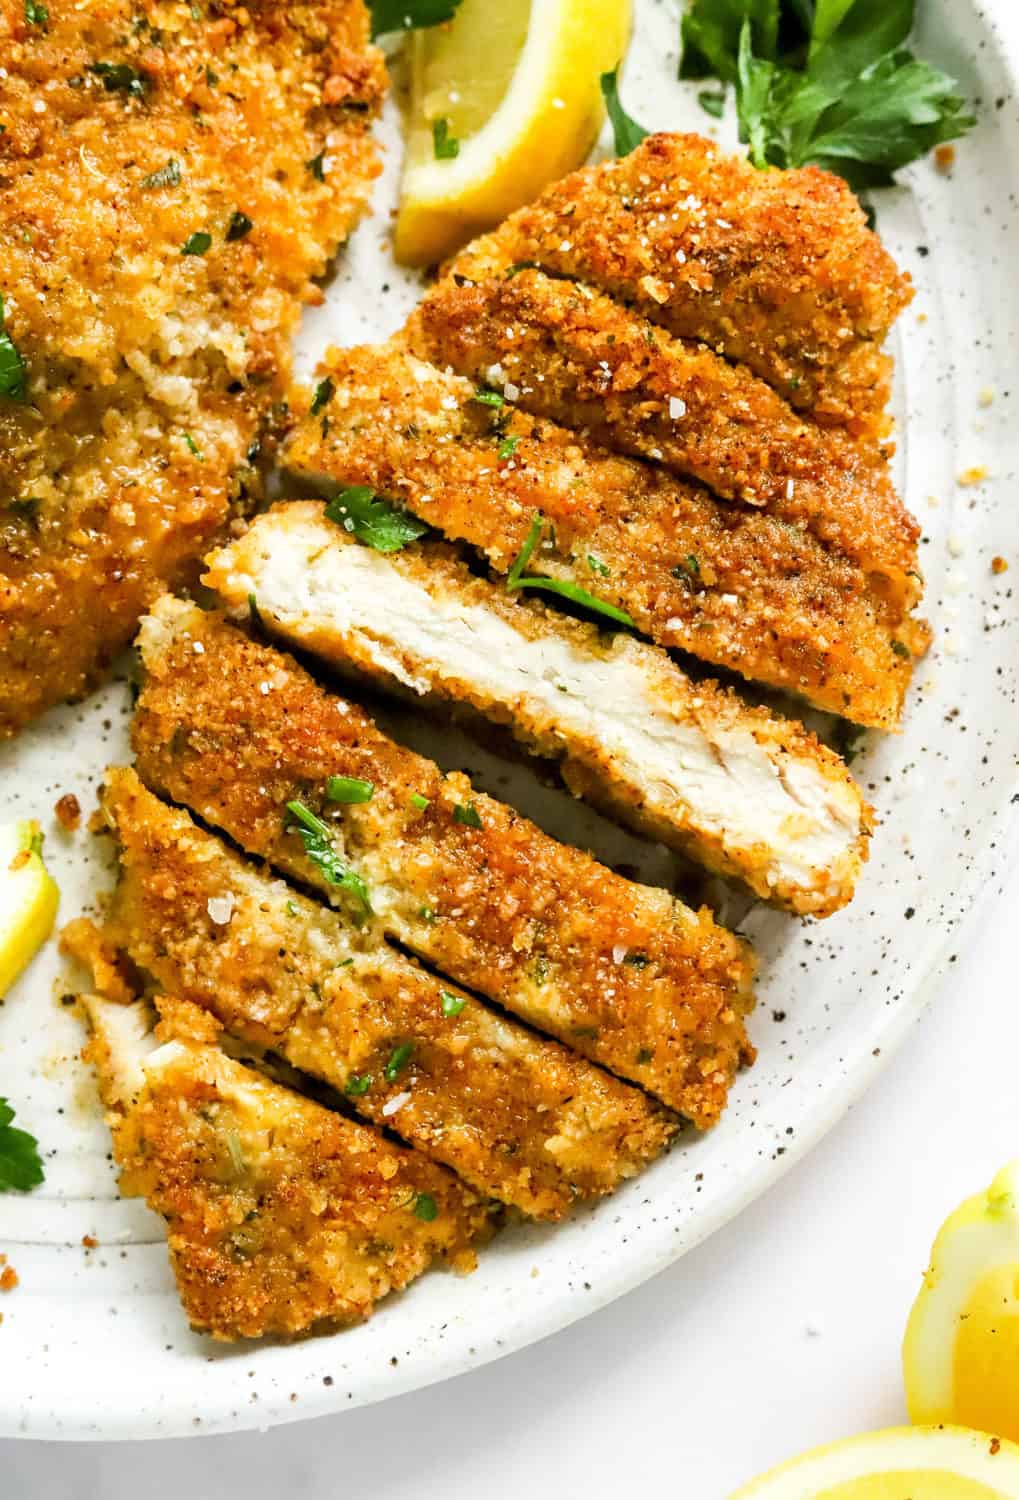 Crispy baked chicken cutlet sliced on a plate with another chicken cutlets, a slice of lemon and some herbs next to it. 